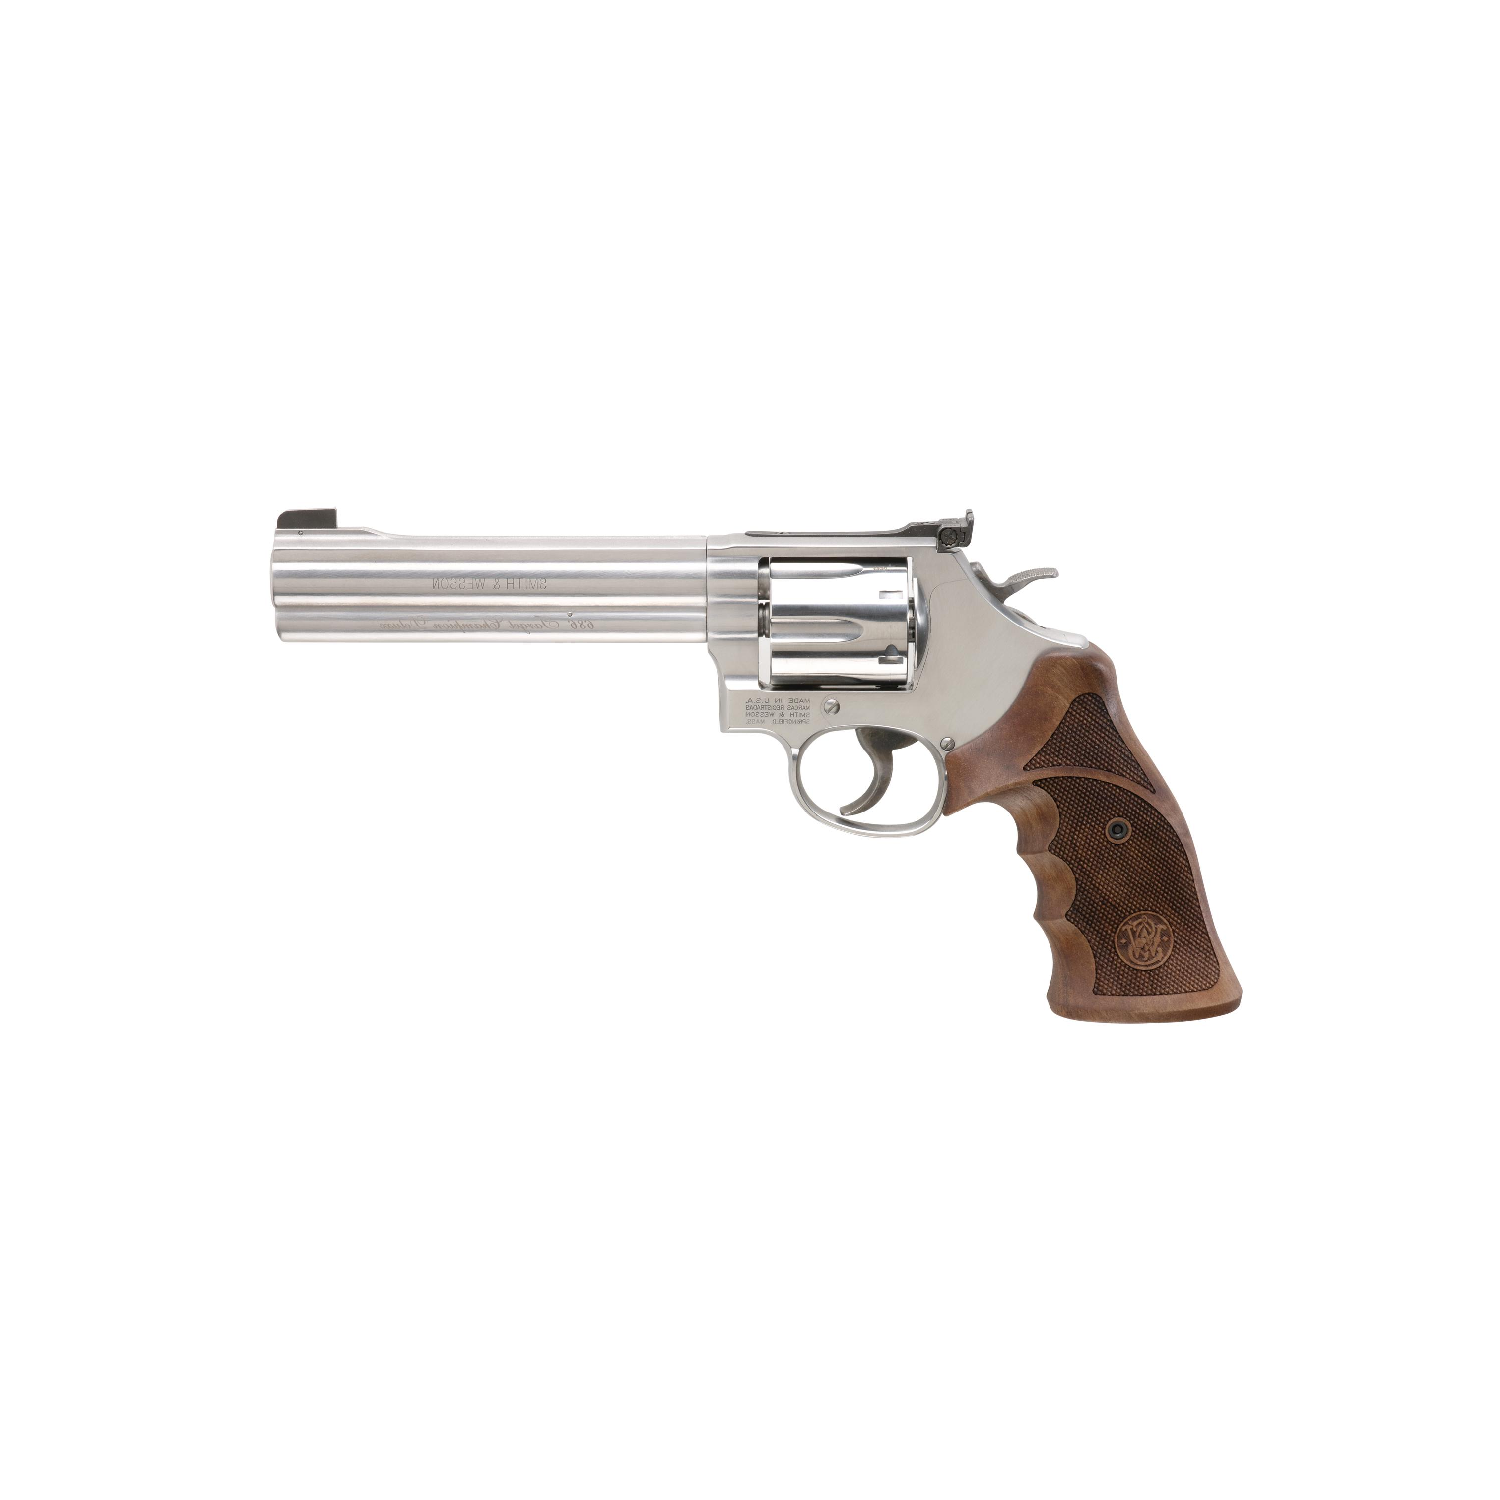 Smith & Wesson Mod. 686 Target Champion Deluxe, .357 Magnum